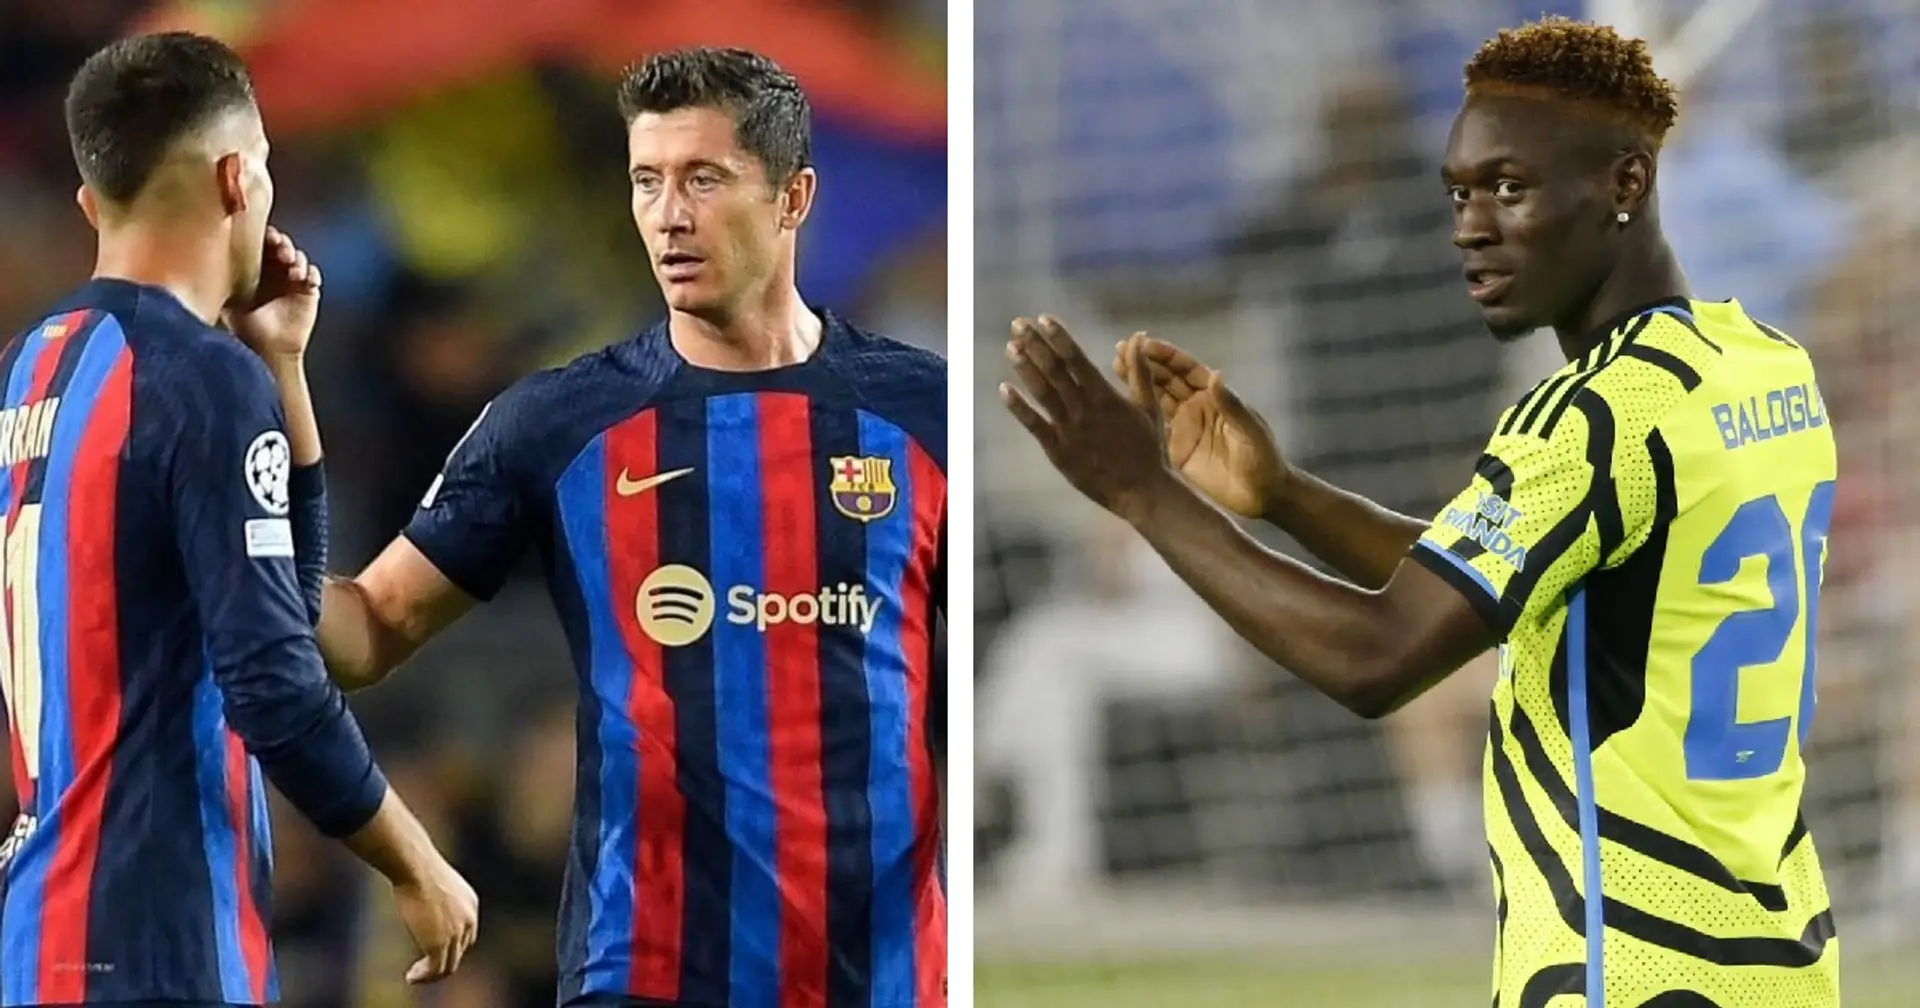 Arsenal linked to Barcelona forward & 2 more under-radar stories today